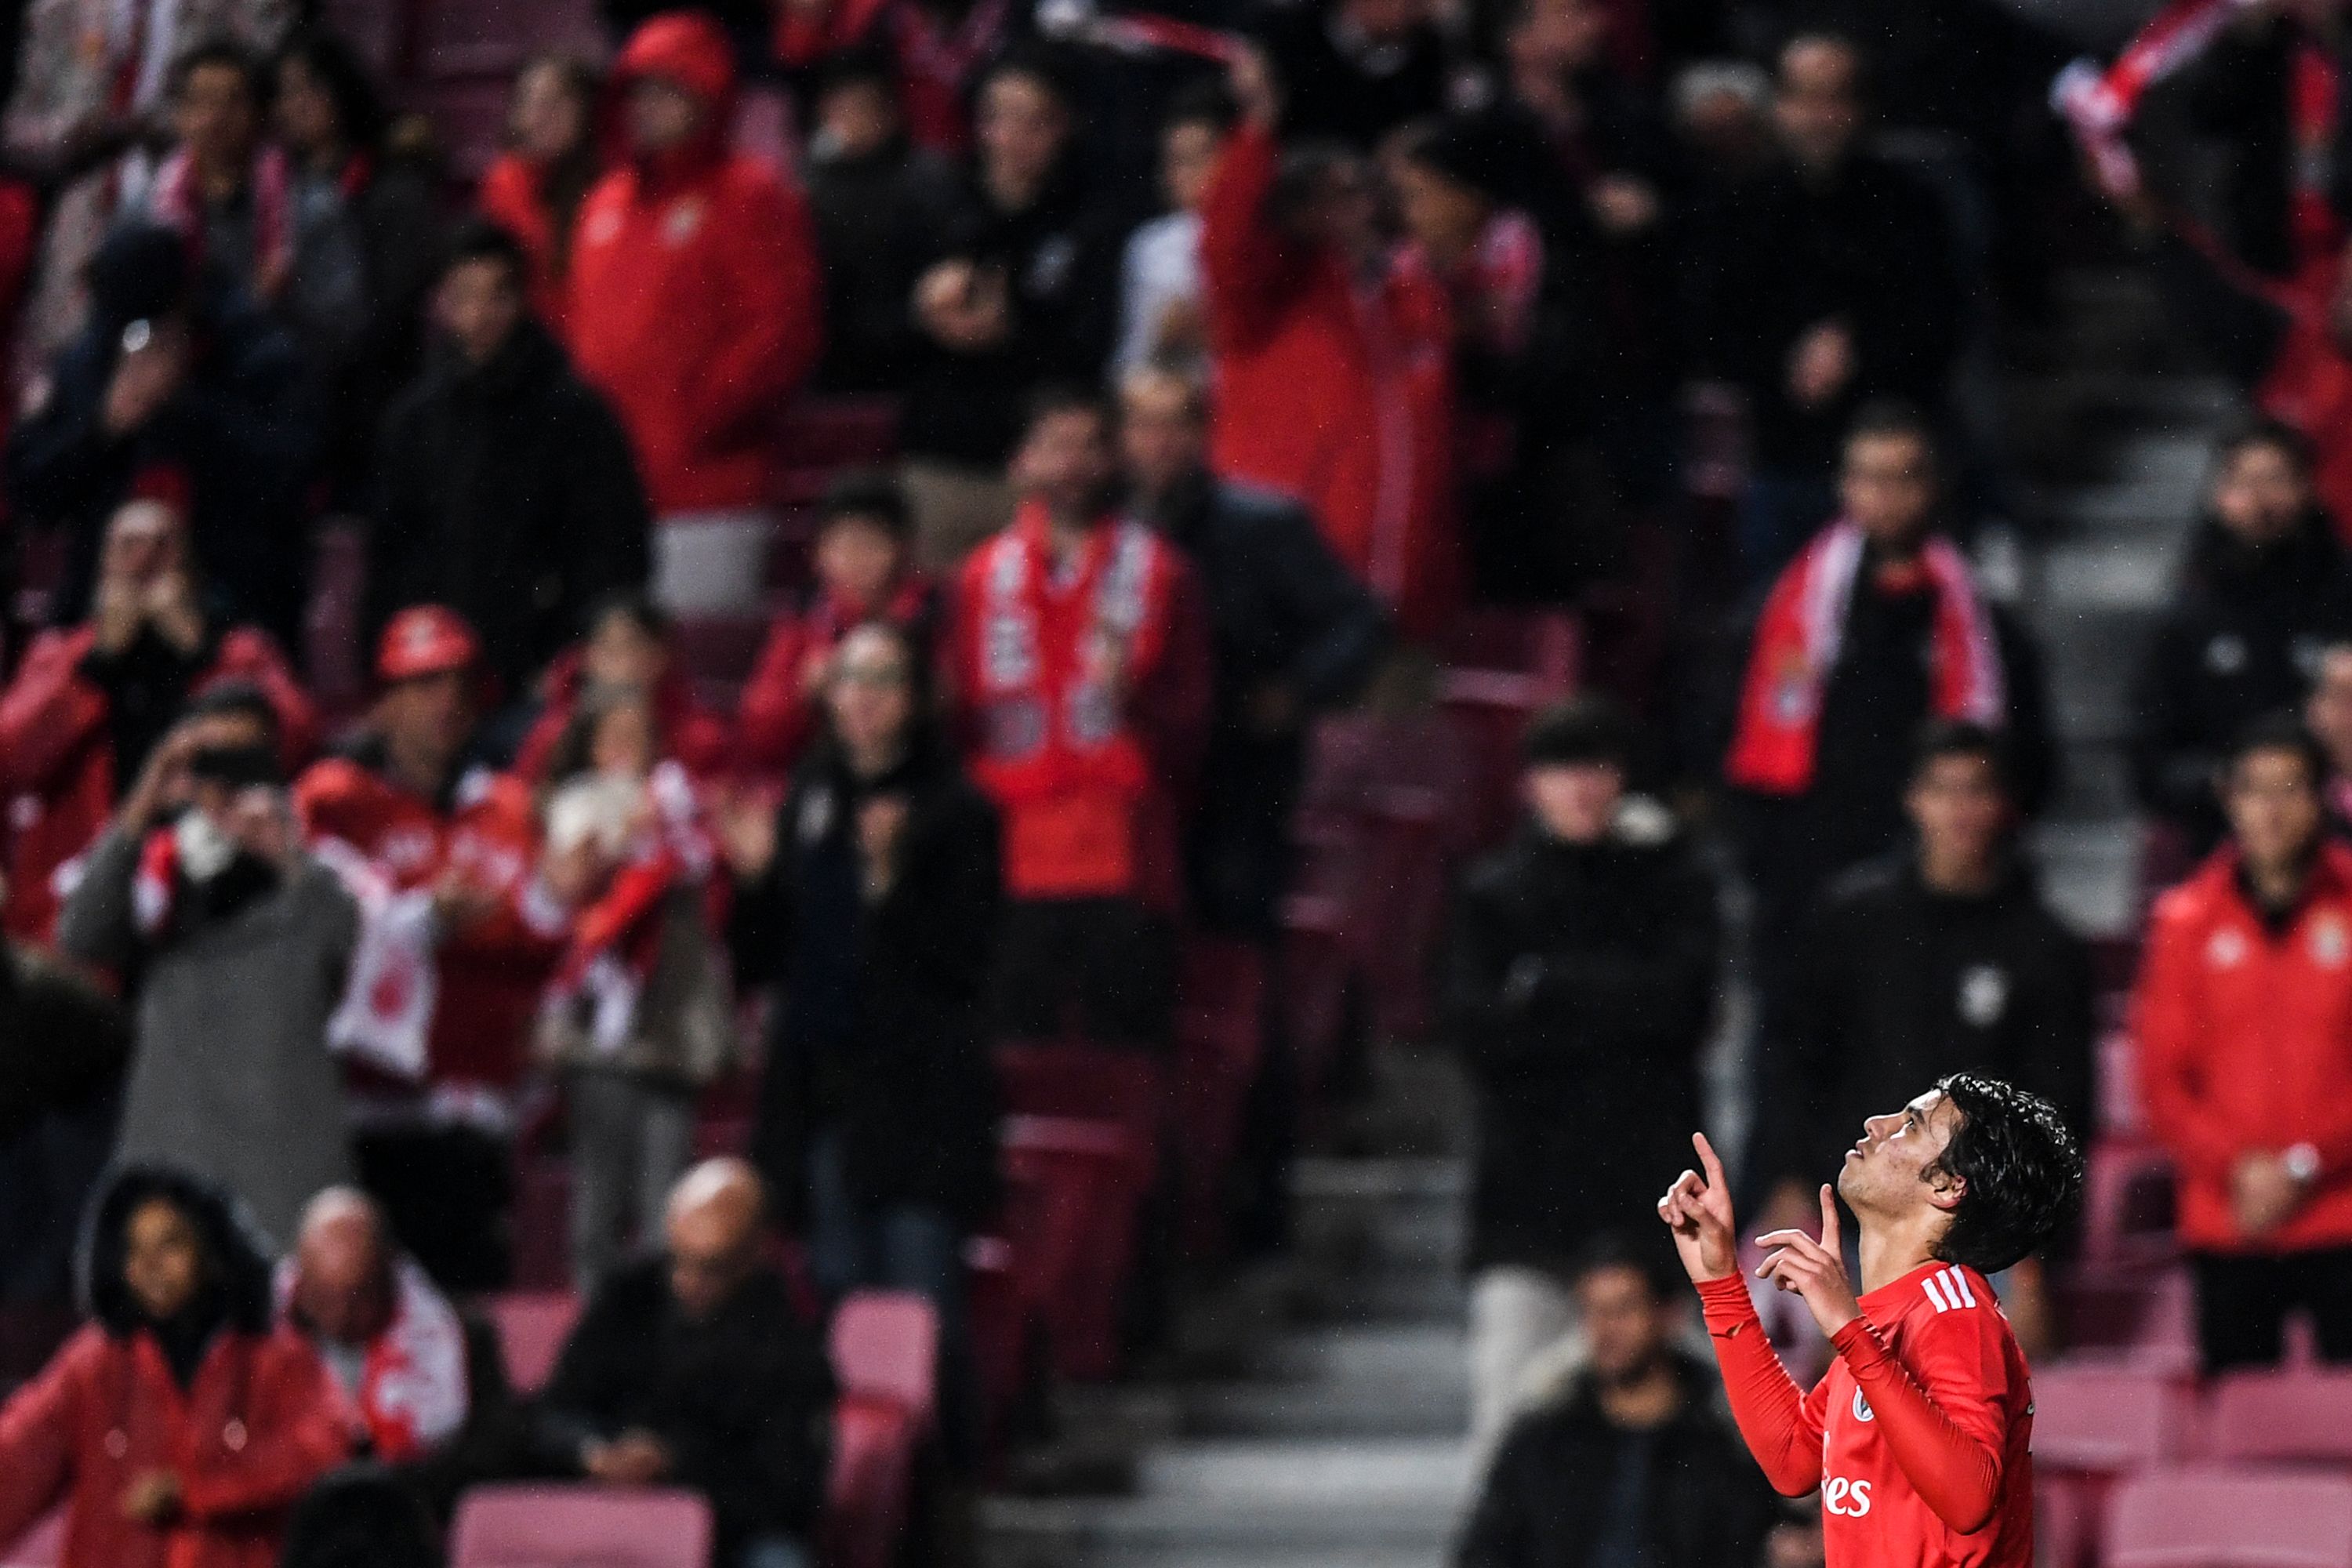 Benfica's Portuguese forward Joao Felix celebrates after scoring a goal during the Portuguese League football match between SL Benfica and Boavista FC at the Luz stadium in Lisbon on January 29, 2019. (Photo by PATRICIA DE MELO MOREIRA / AFP)        (Photo credit should read PATRICIA DE MELO MOREIRA/AFP/Getty Images)